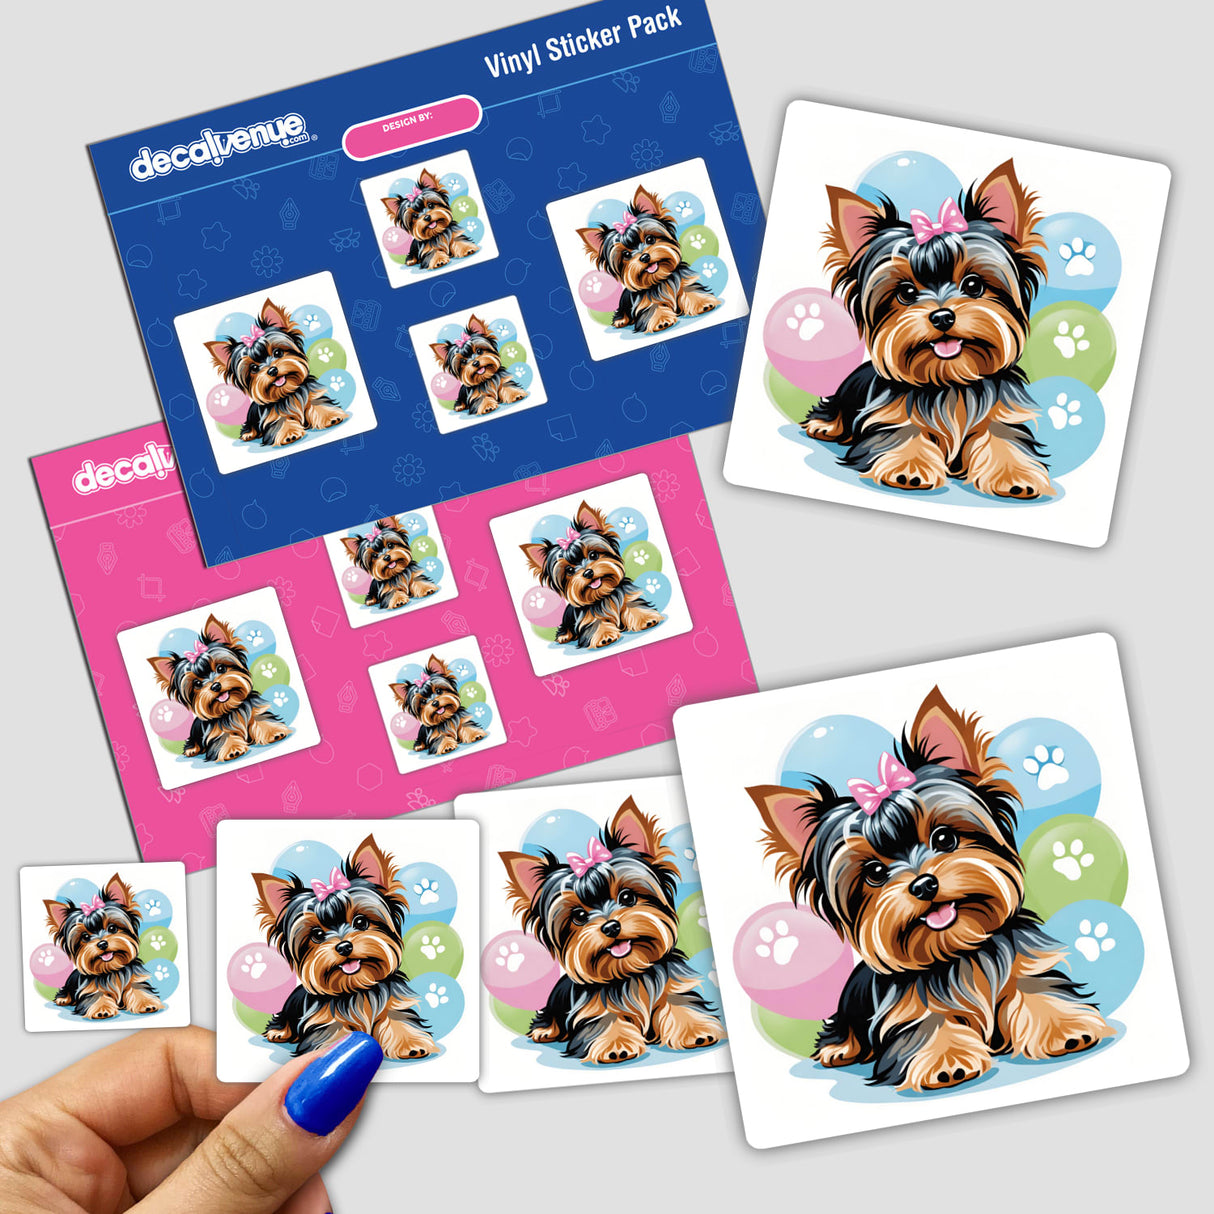 Cute Girl Yorkie w/Pink Bow and Pawprints